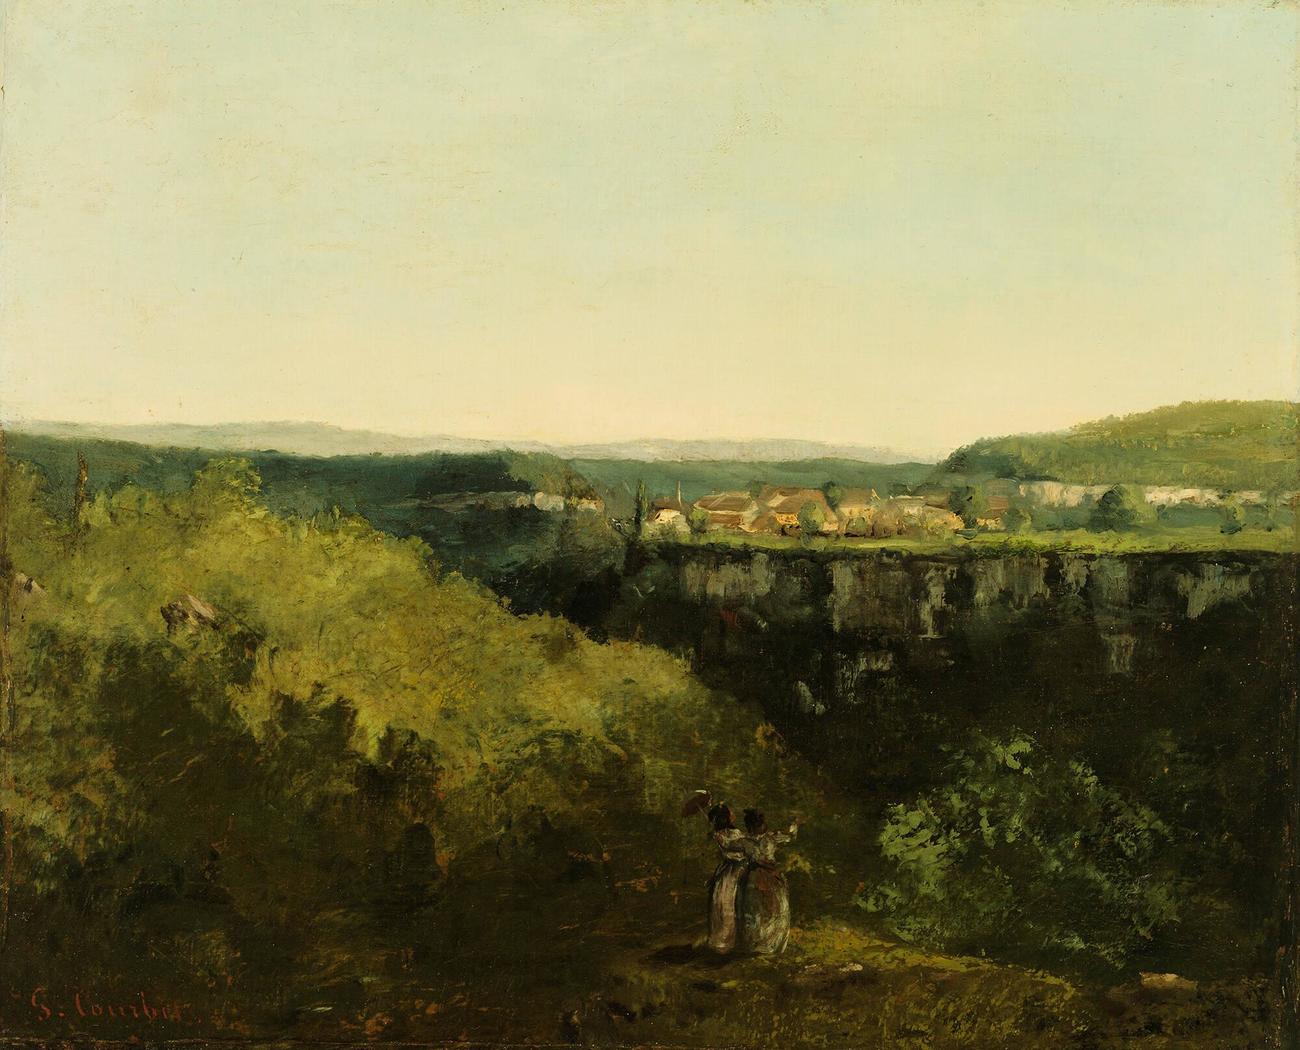 An oil painting of a landscape with two women in the foreground looking out into the distance where there are hills and a cluster of small buildings. A before and after slider shows the impact of the painting’s recent restoration.